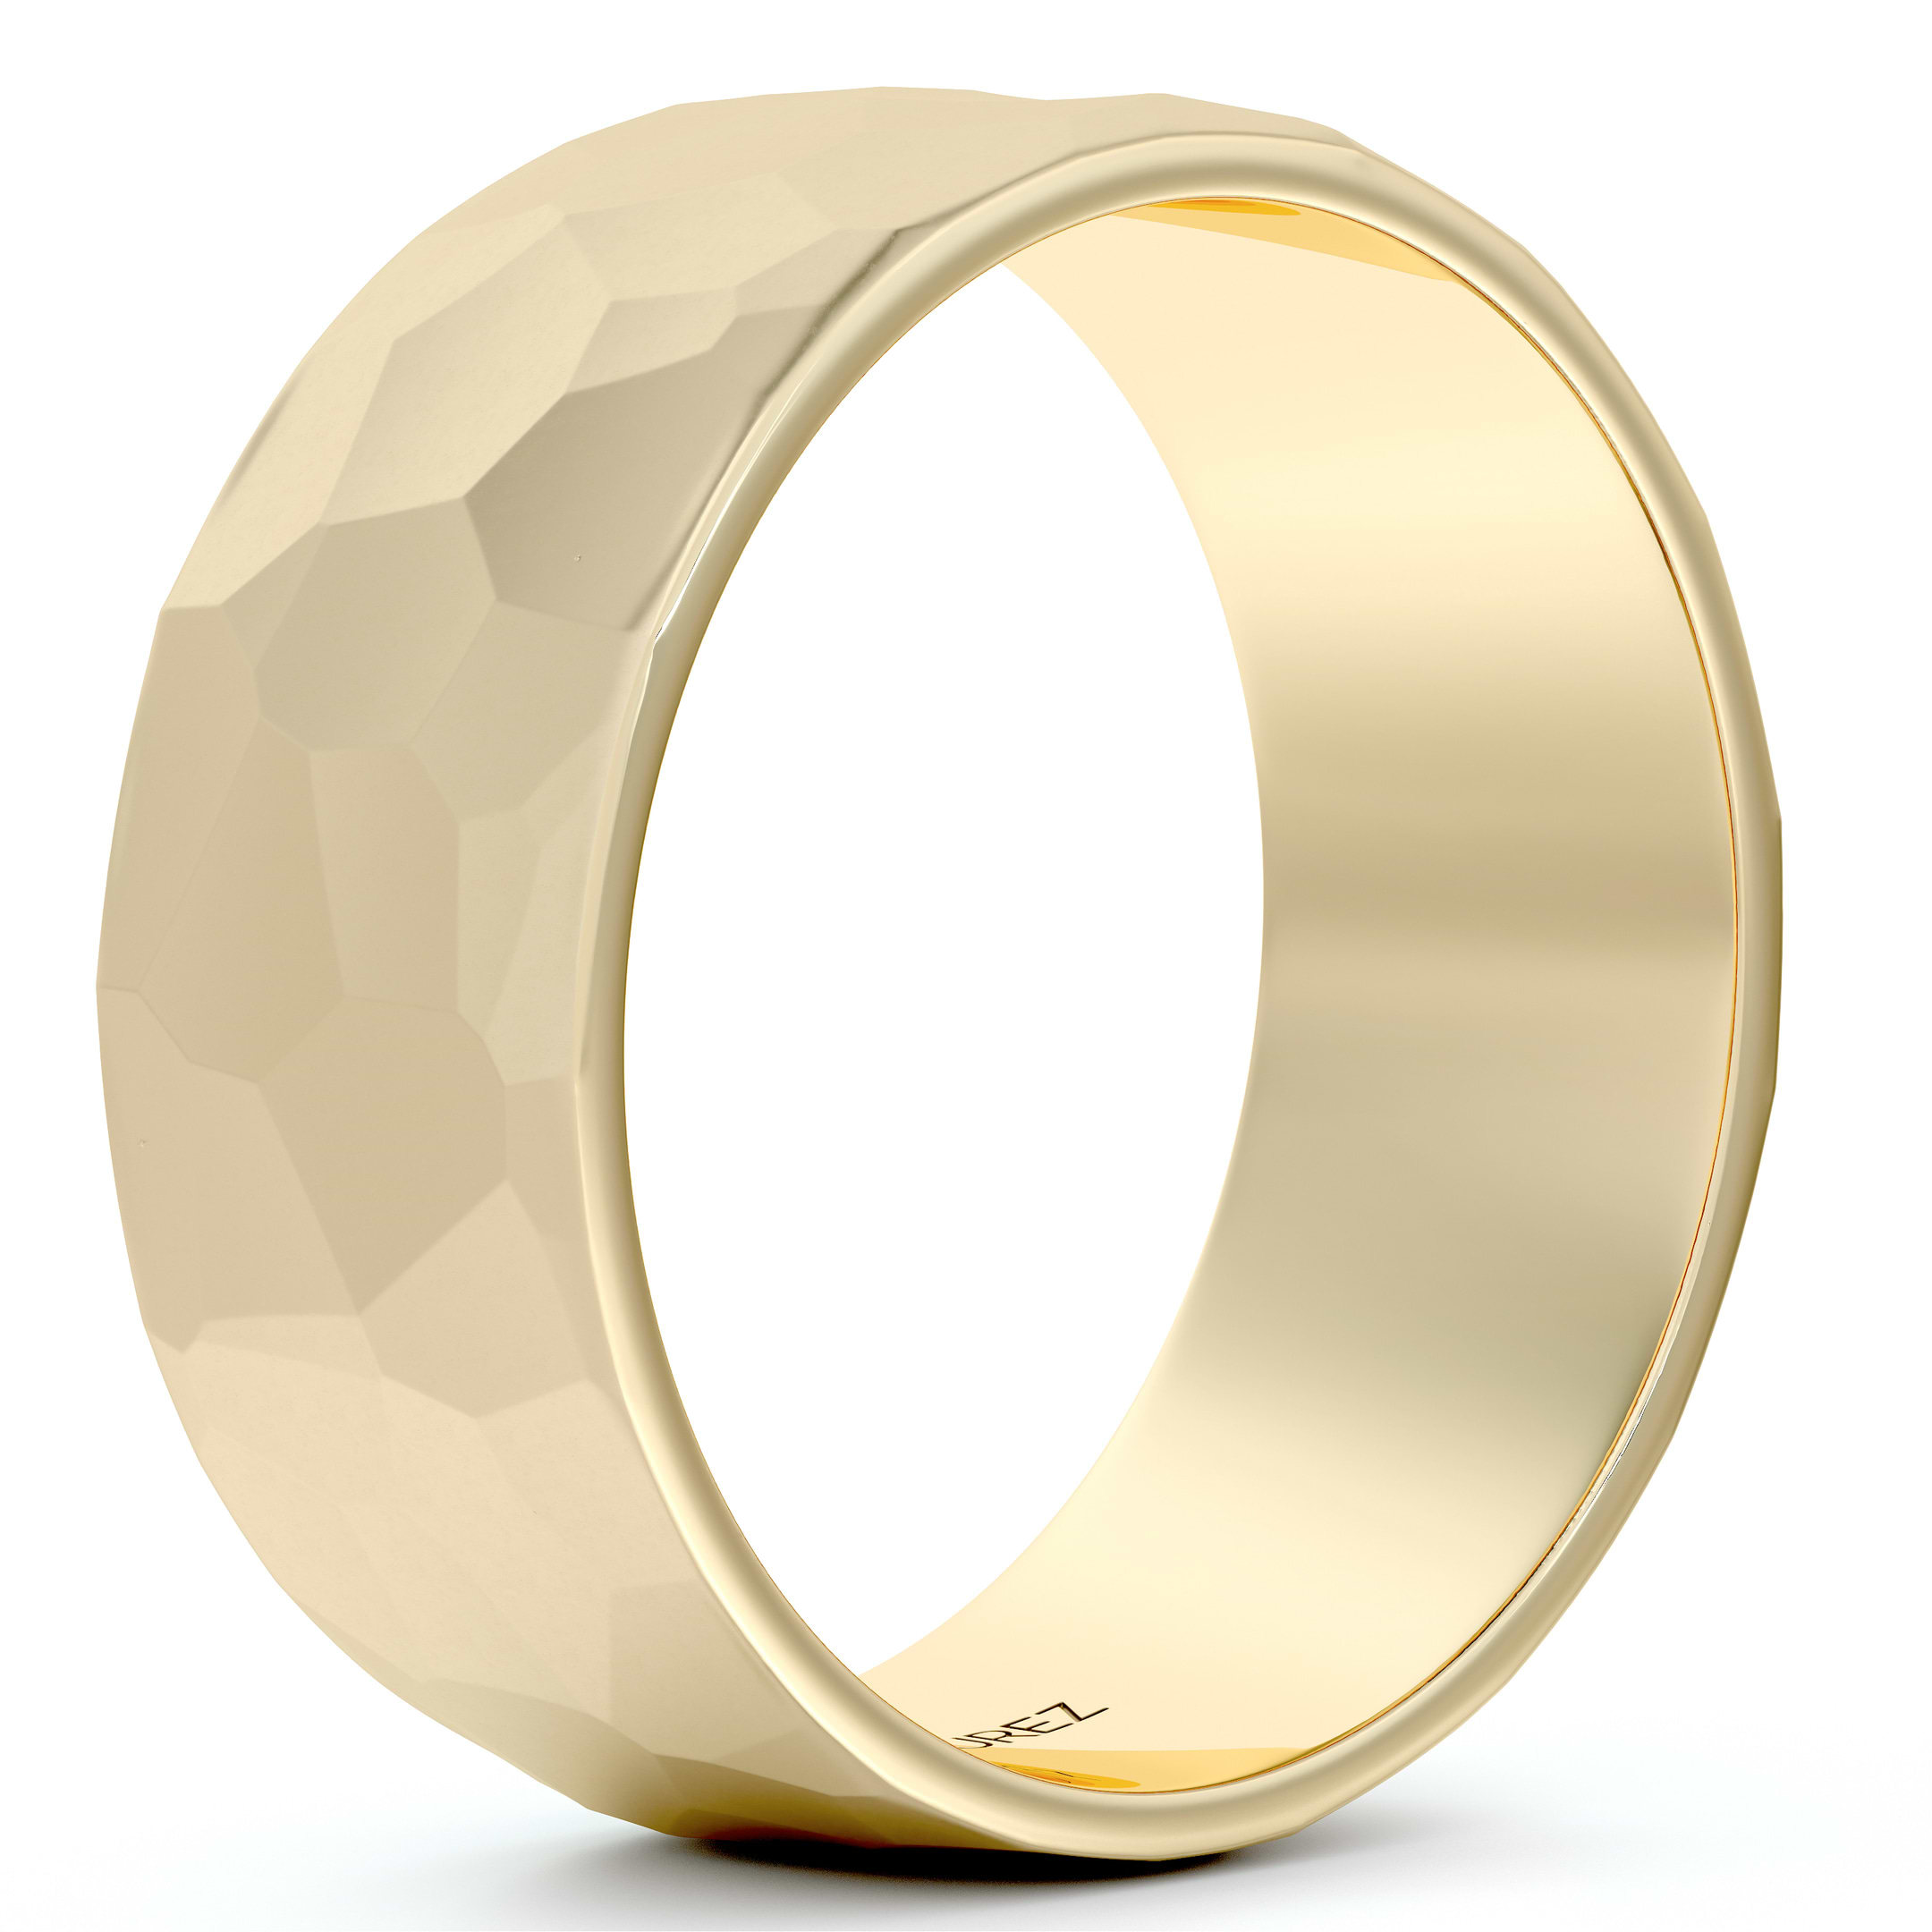 Men's Hammered Finished Carved Band Wedding Ring 18k Yellow Gold (7mm)